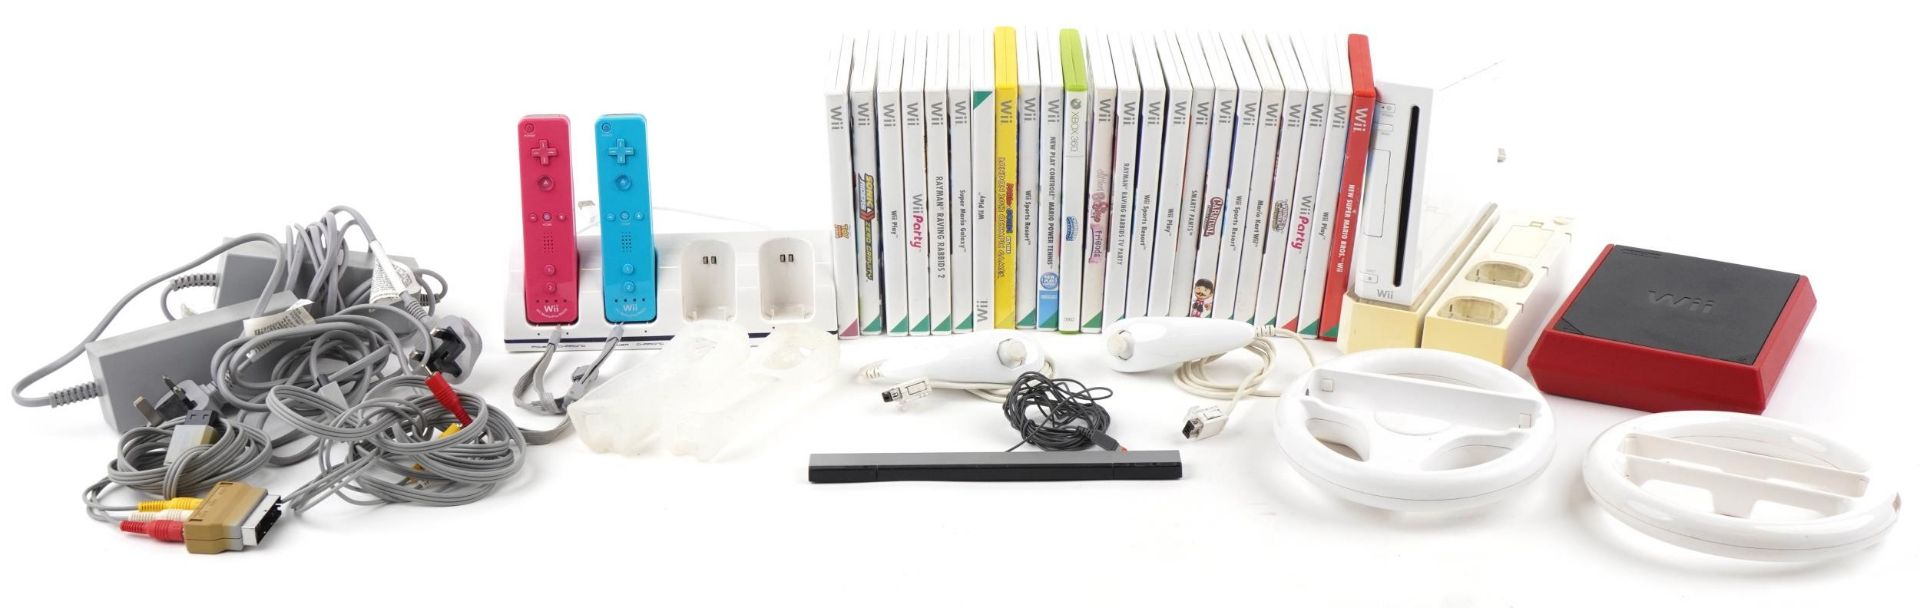 Two Nintendo Wii games consoles including Wii Mini, with controllers, accessories and a collection